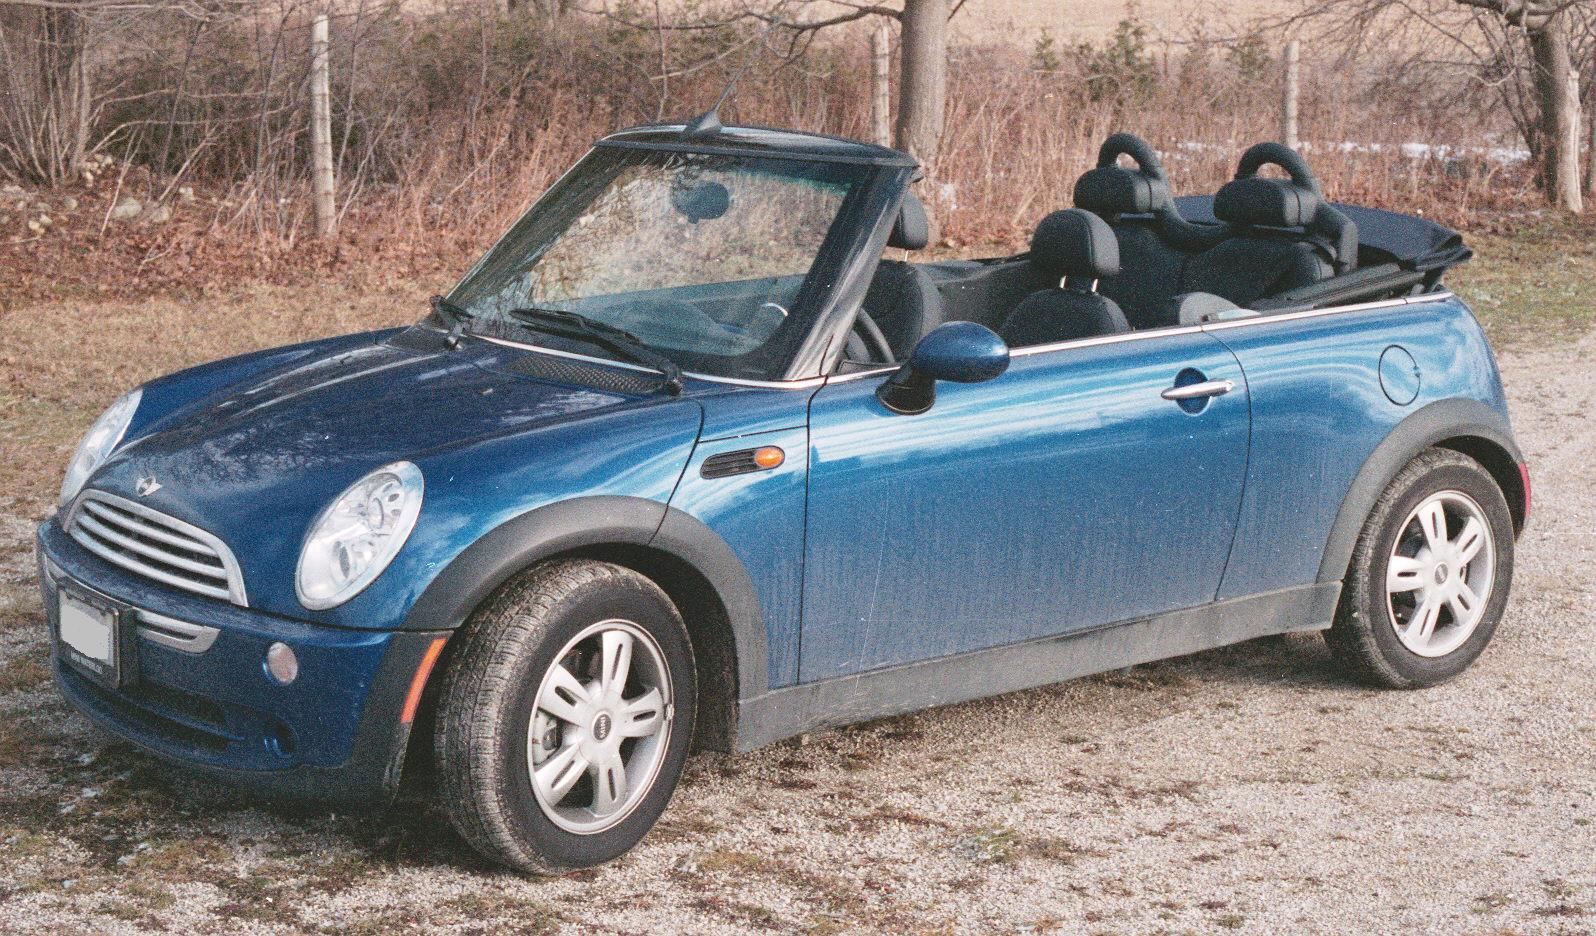 Dirty 2005 MINI Cooper convertible | Flickr - Photo Sharing!